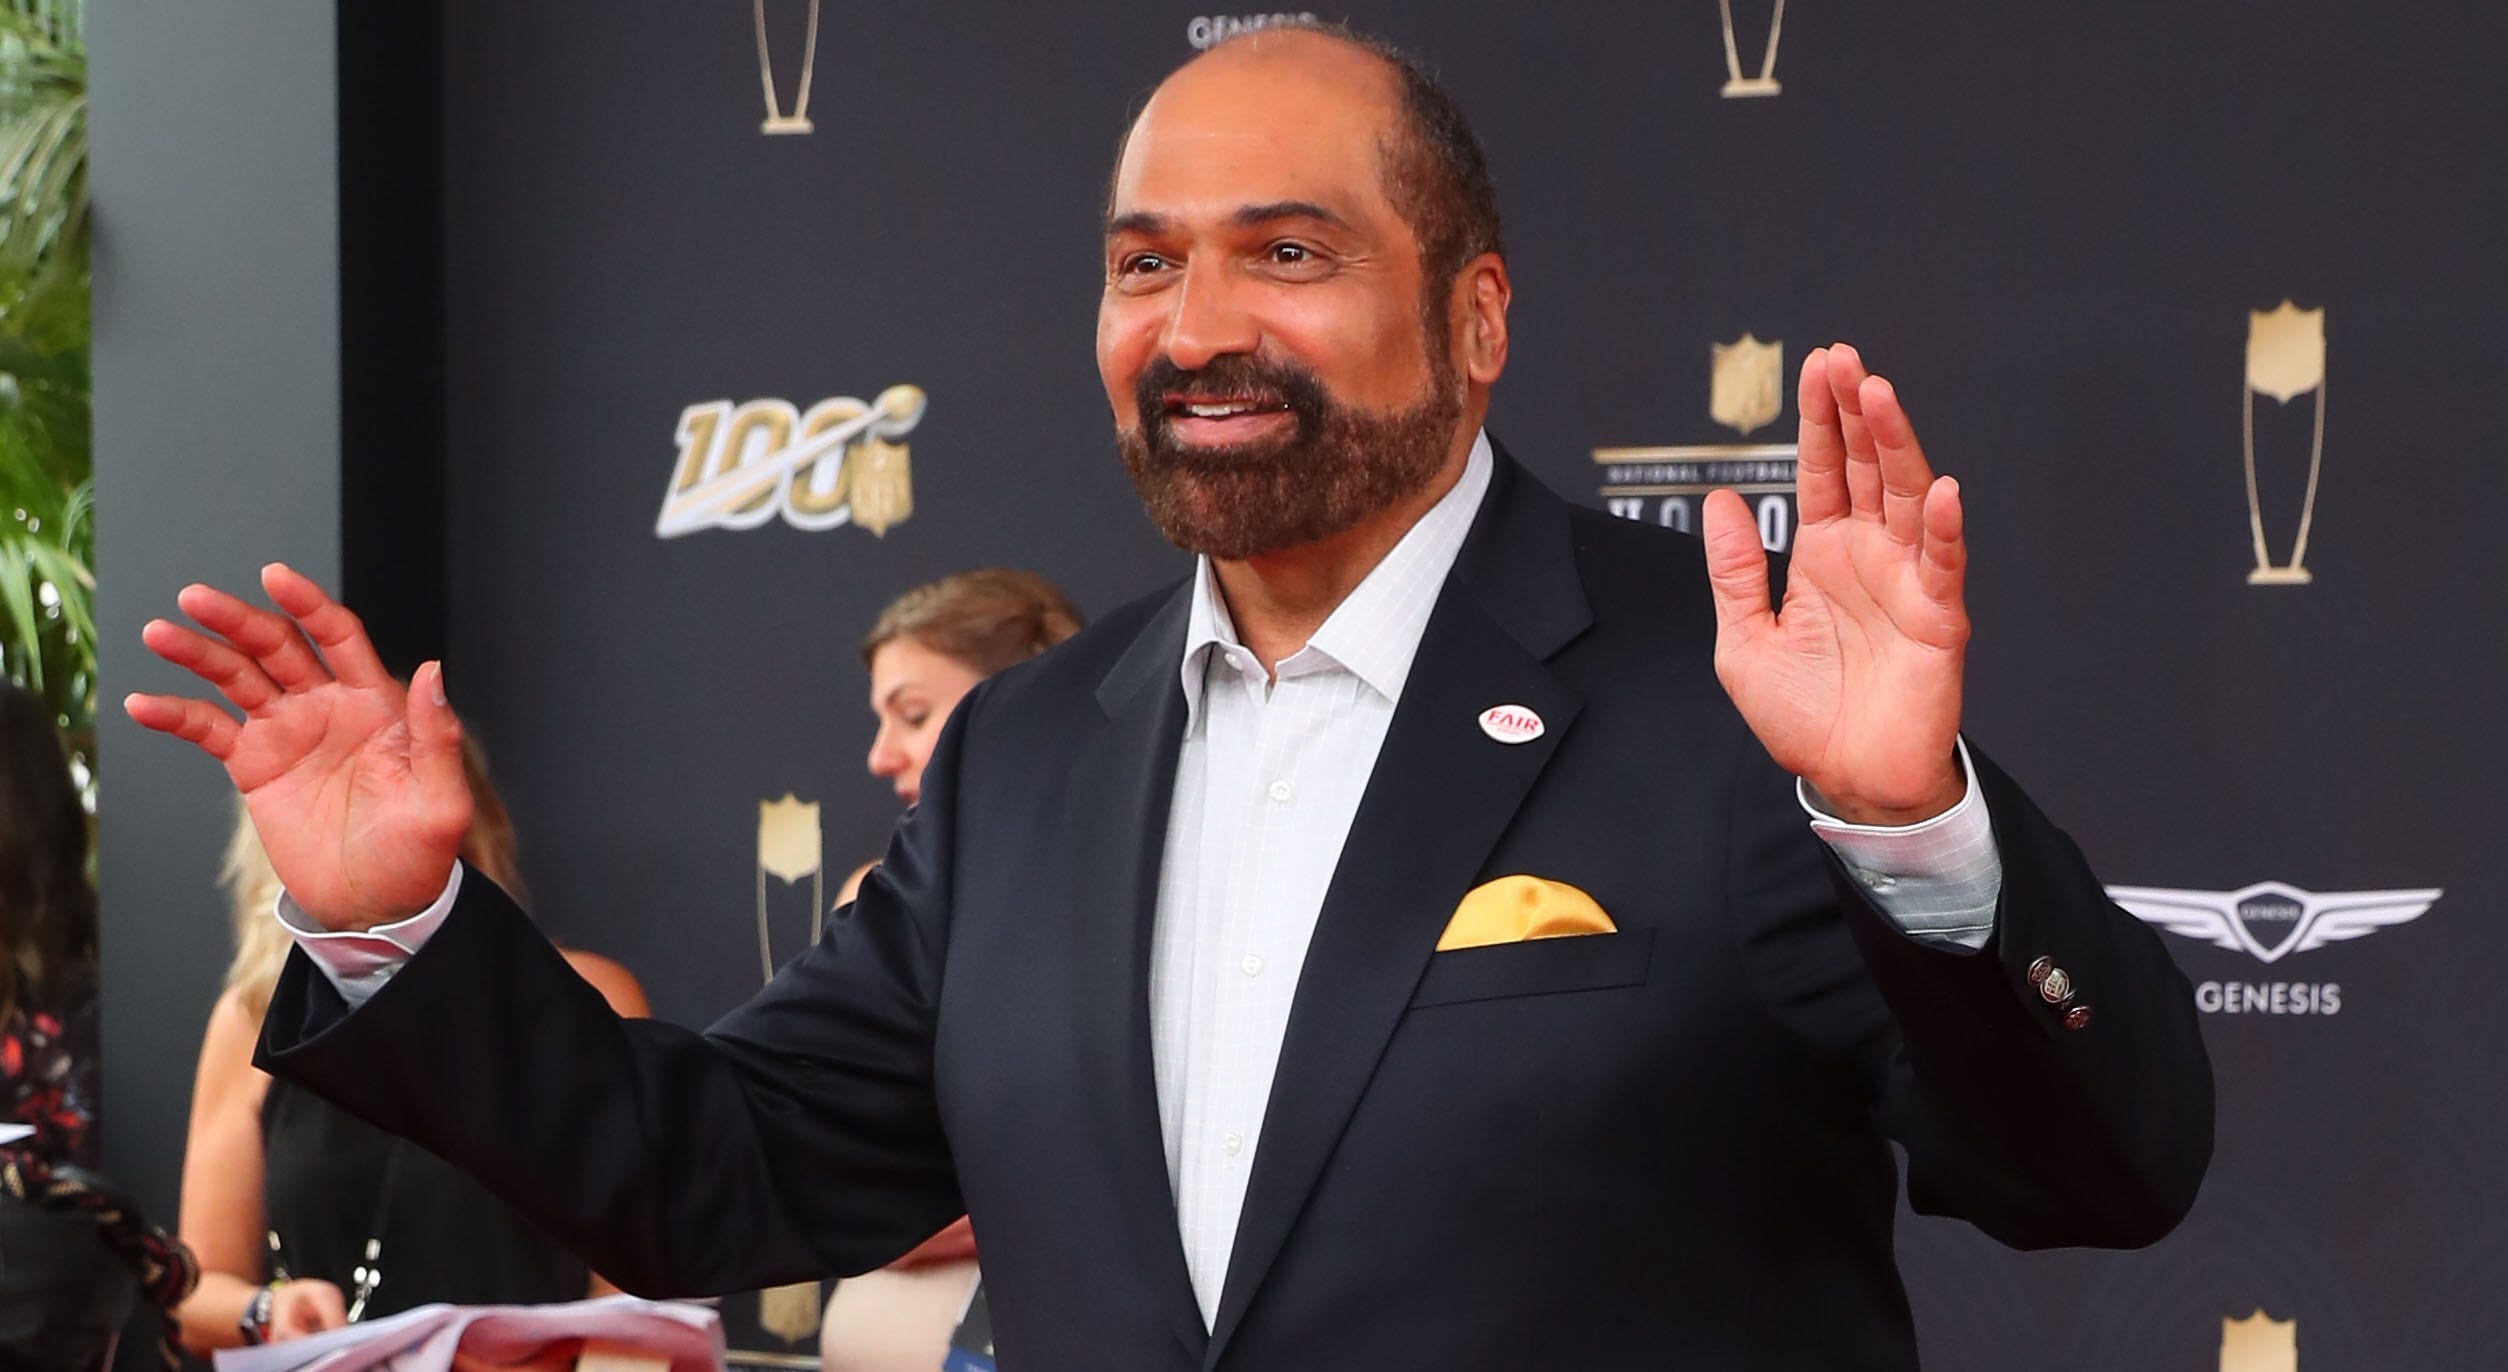 NFL Network cuts Steelers’ Franco Harris tribute to commercial, fans react in disgust